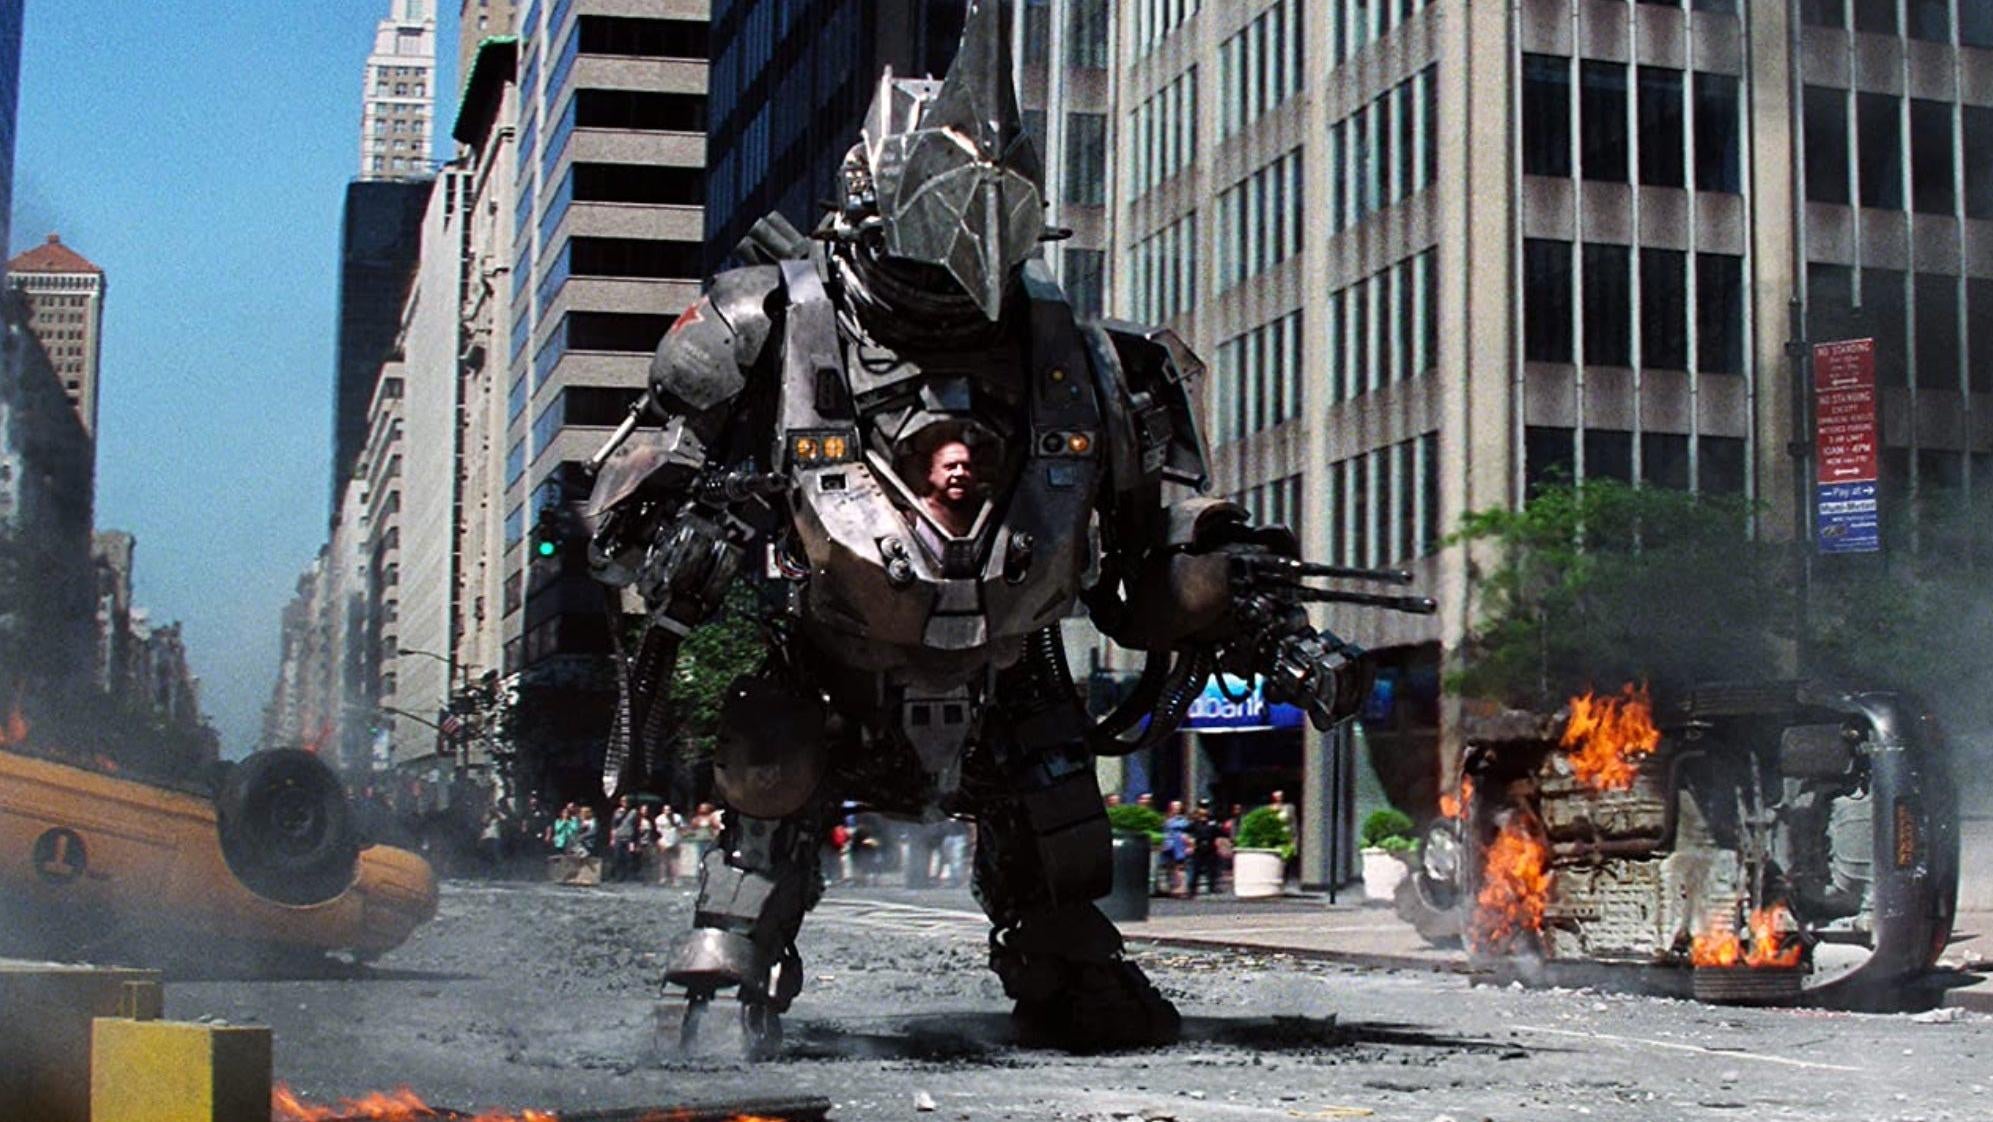 Rhino was probably coming back. (Image: Sony Pictures)